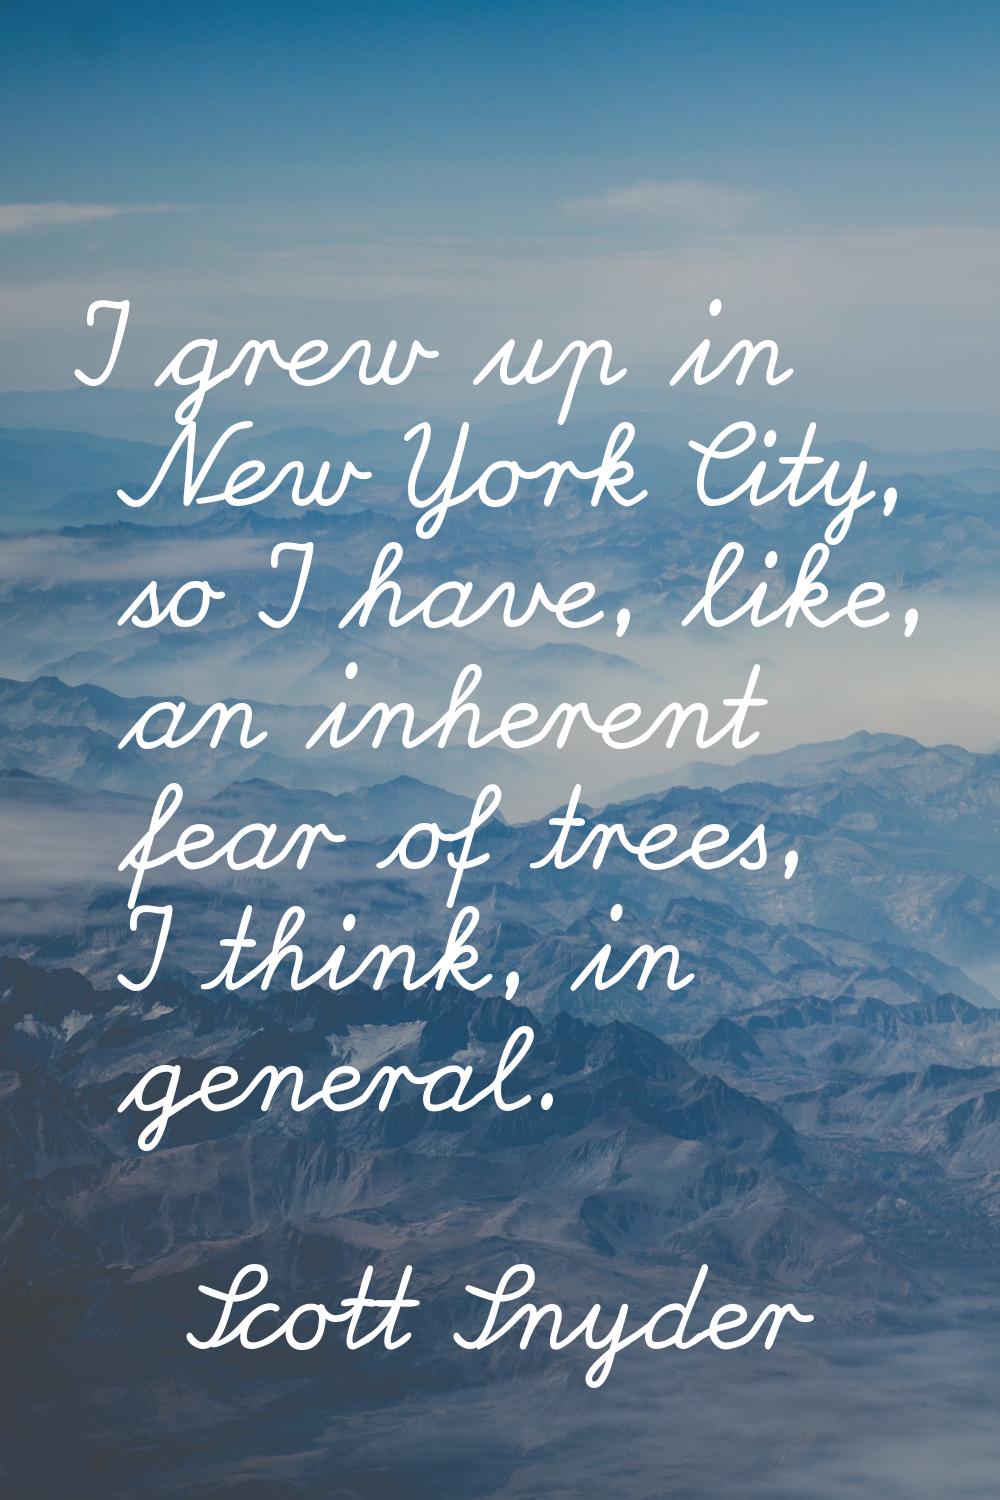 I grew up in New York City, so I have, like, an inherent fear of trees, I think, in general.